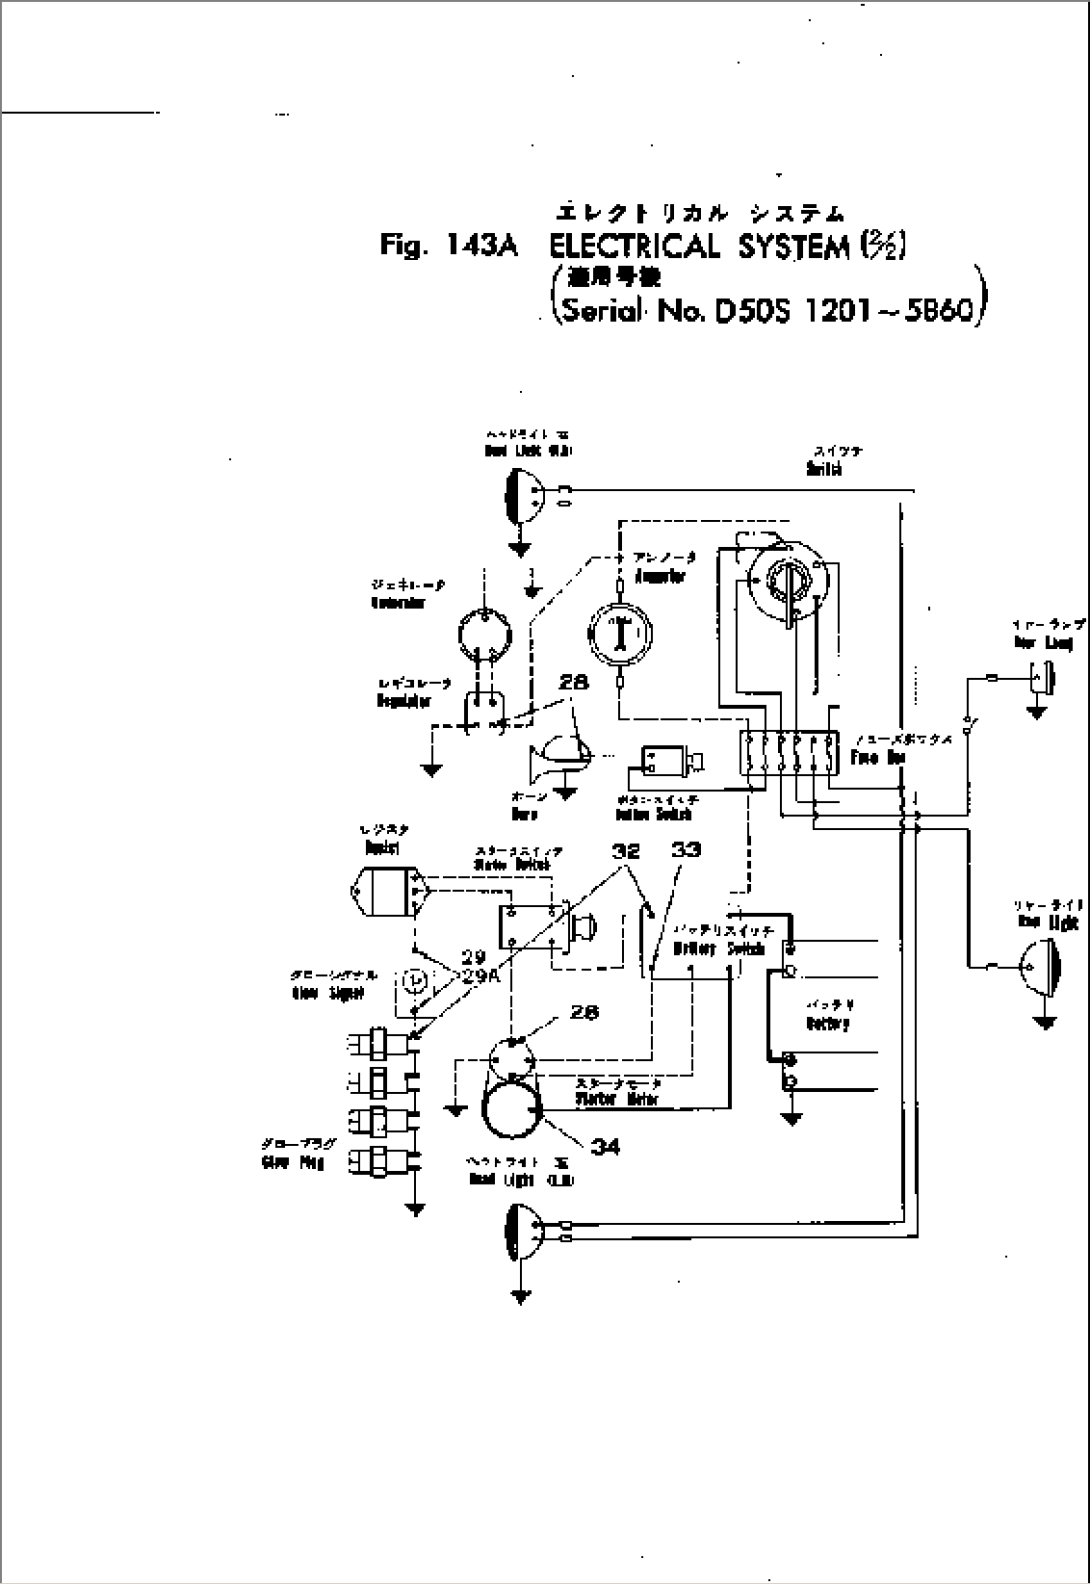 ELECTRICAL SYSTEM (2/2)